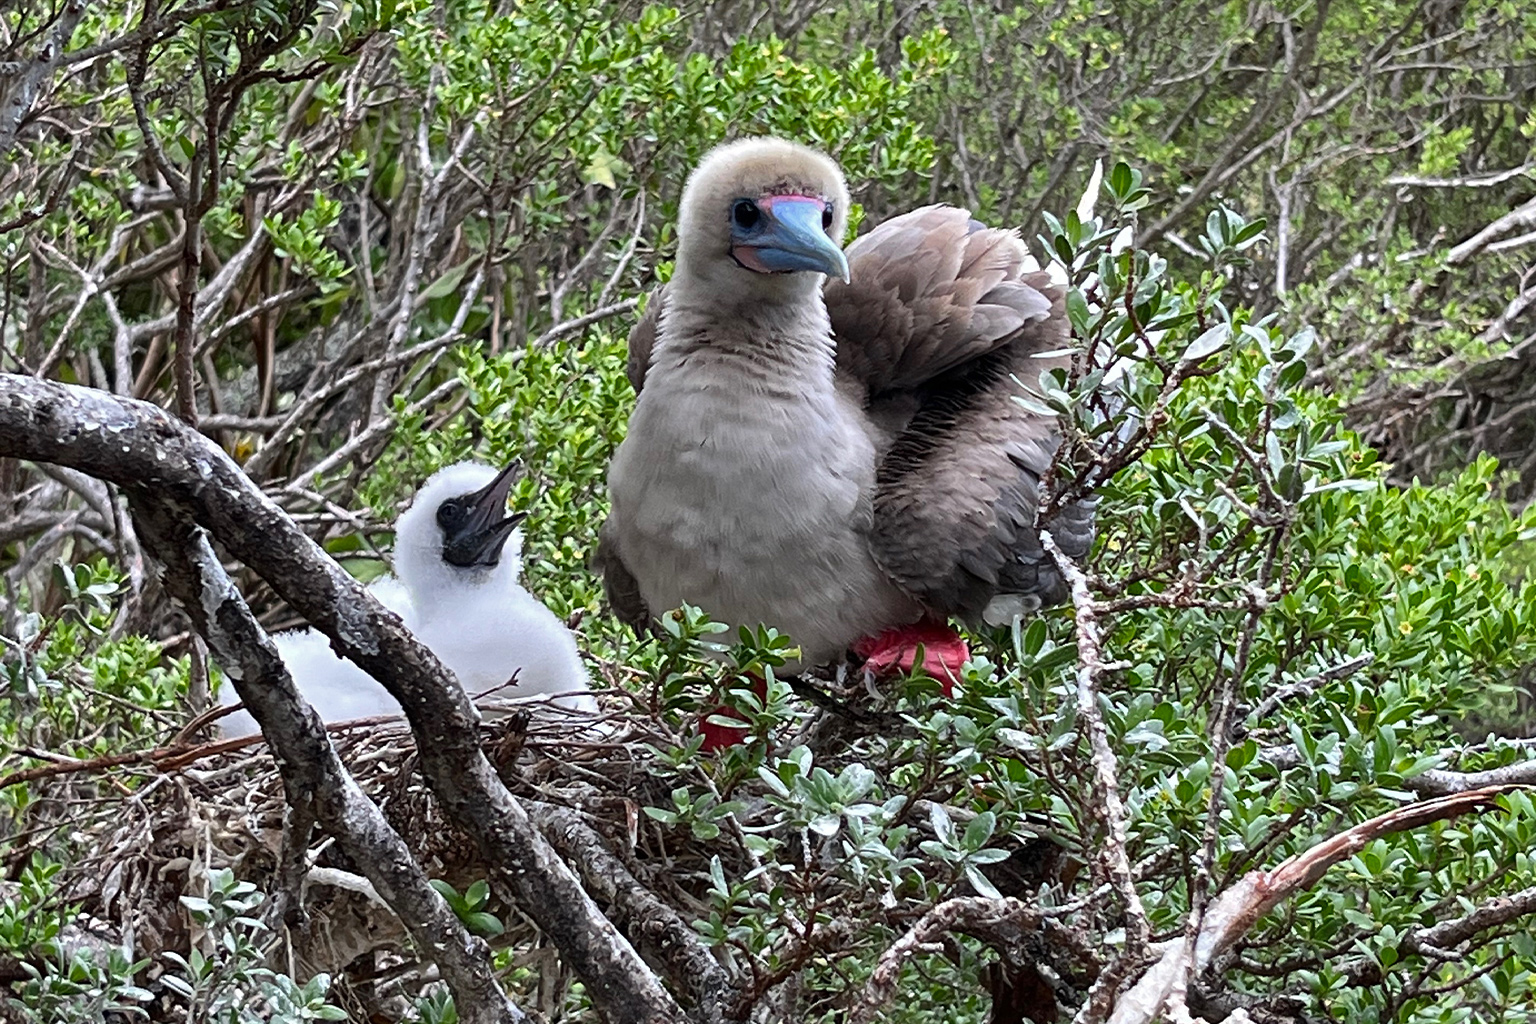 A red-footed booby and its white chick.